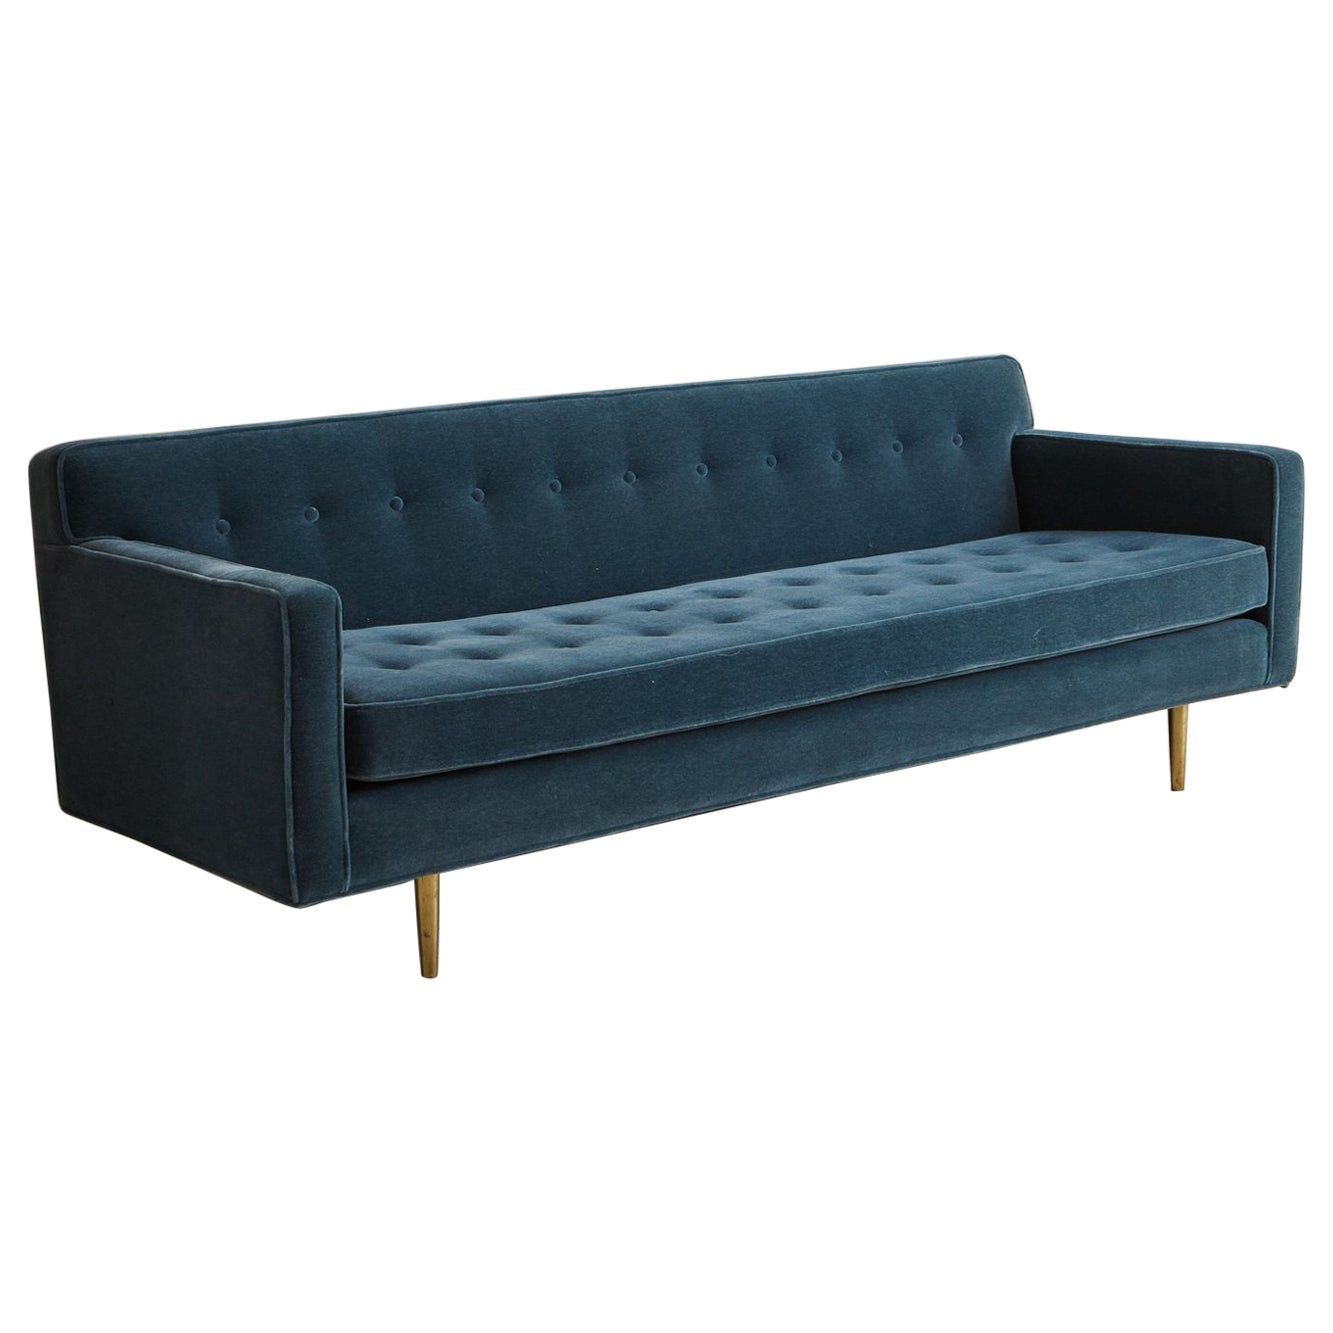 Tufted Sofa in Blue Mohair Attributed to Edward Wormley for Dunbar, USA 1950s